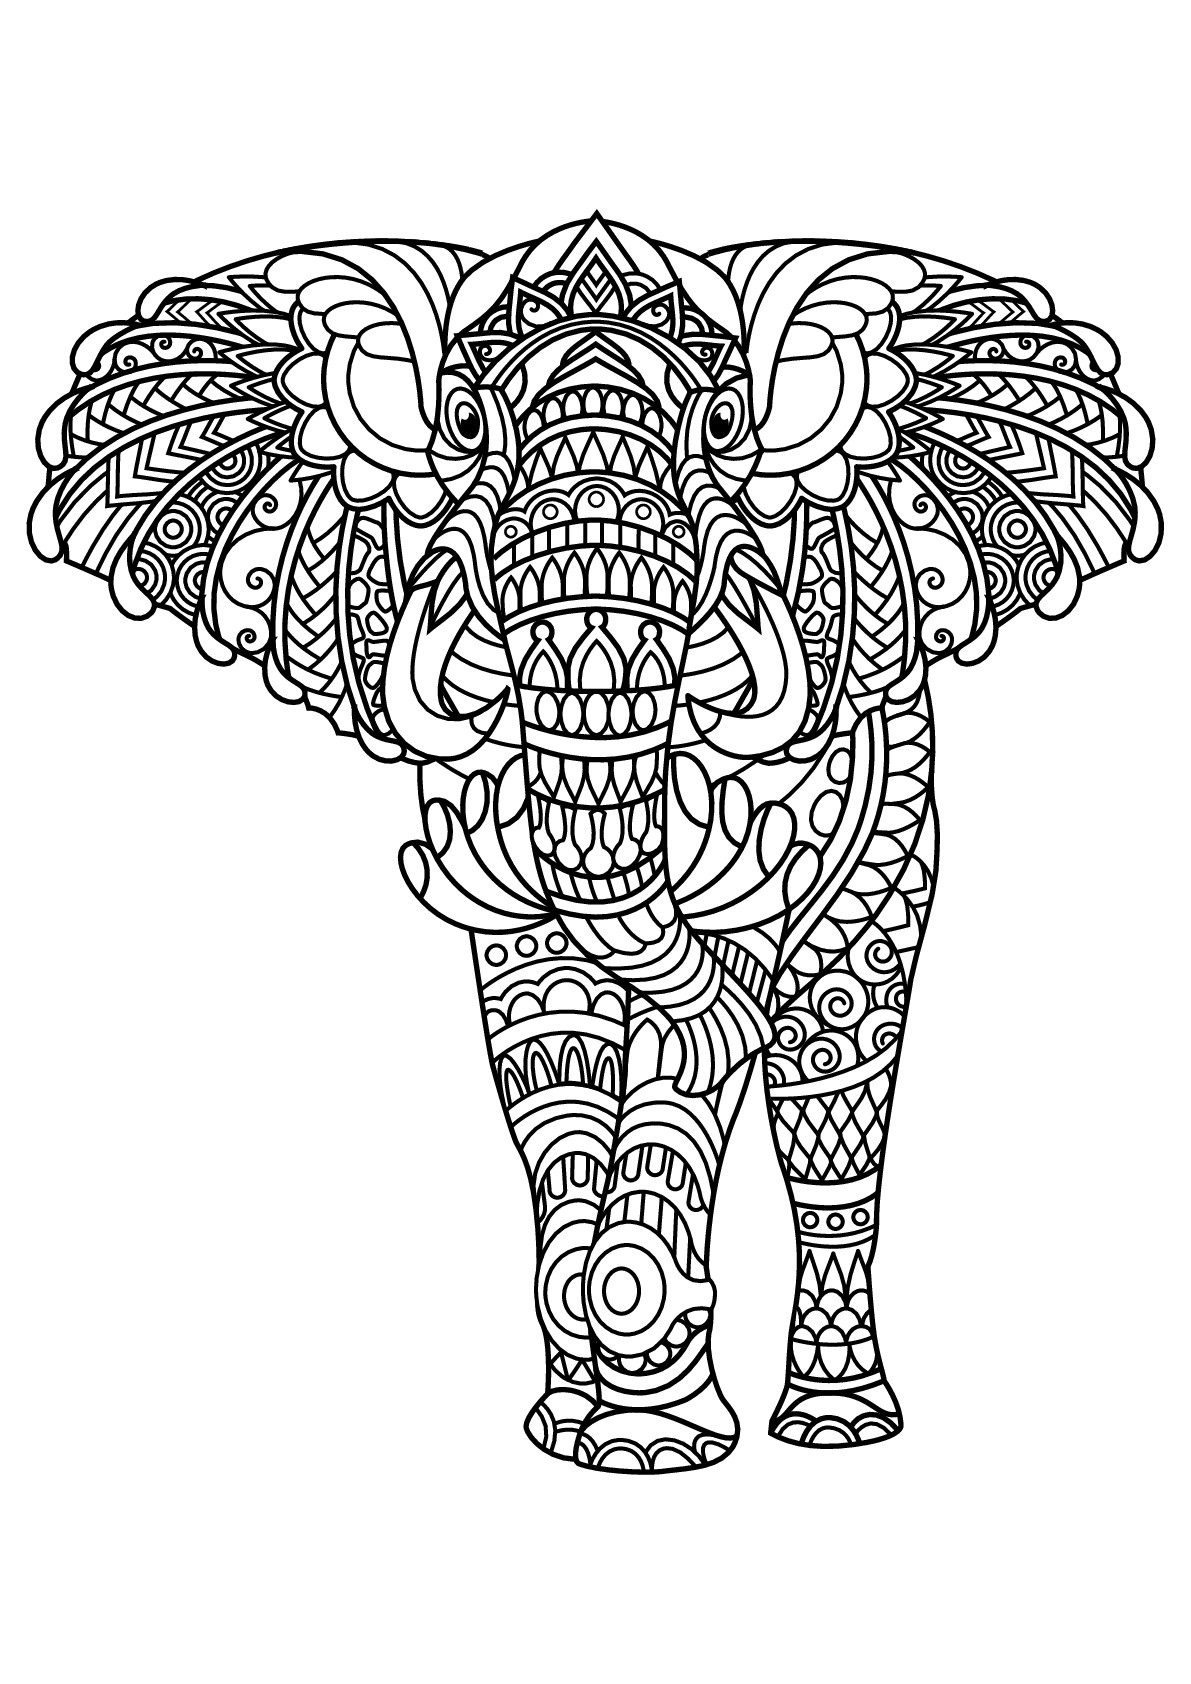 Adult Coloring Book Elephant
 Free book elephant Elephants Adult Coloring Pages